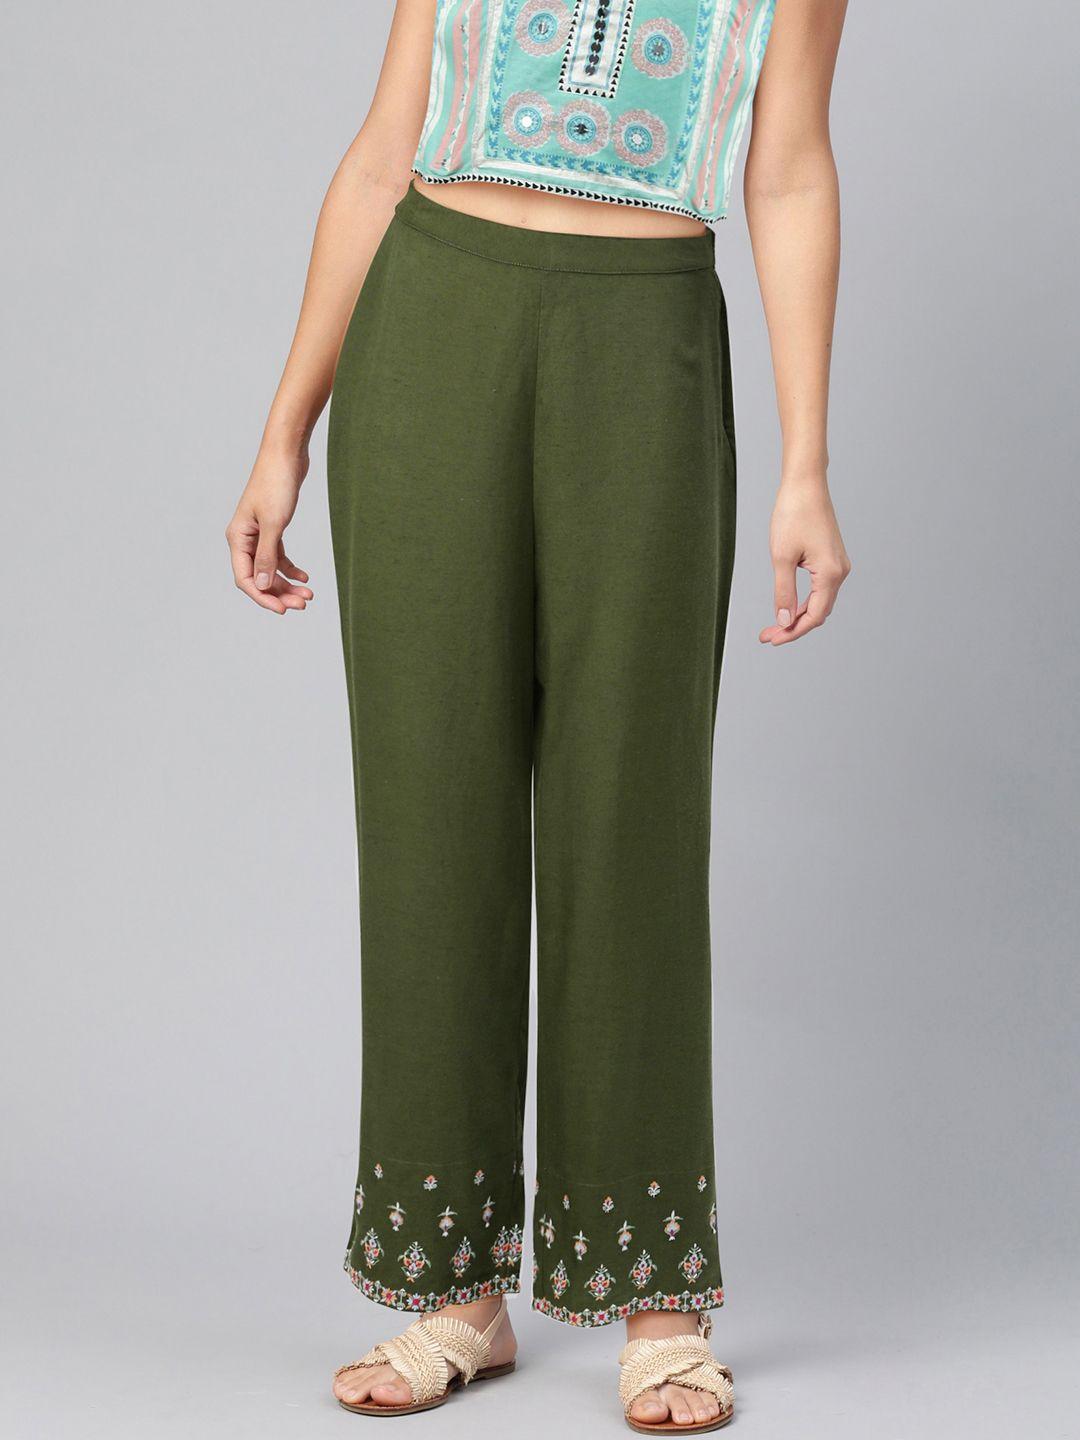 global desi women olive green regular fit solid parallel trousers with embroidered details